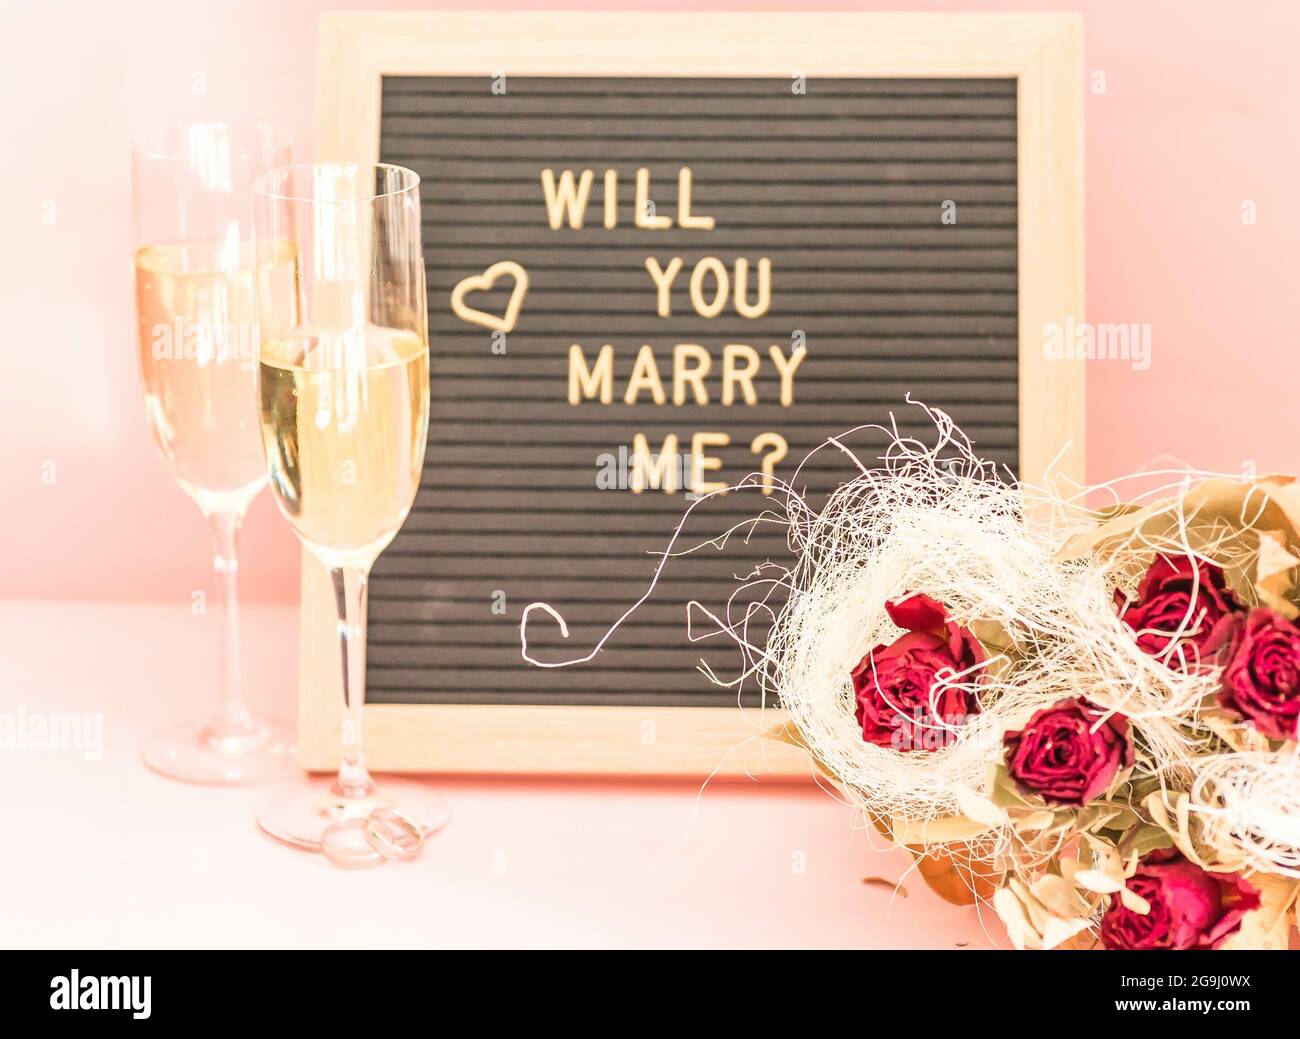 https://c8.alamy.com/comp/2G9J0WX/glasses-of-champagne-a-bouquet-of-artificial-flowers-and-will-you-marry-me-board-on-the-table-2G9J0WX.jpg